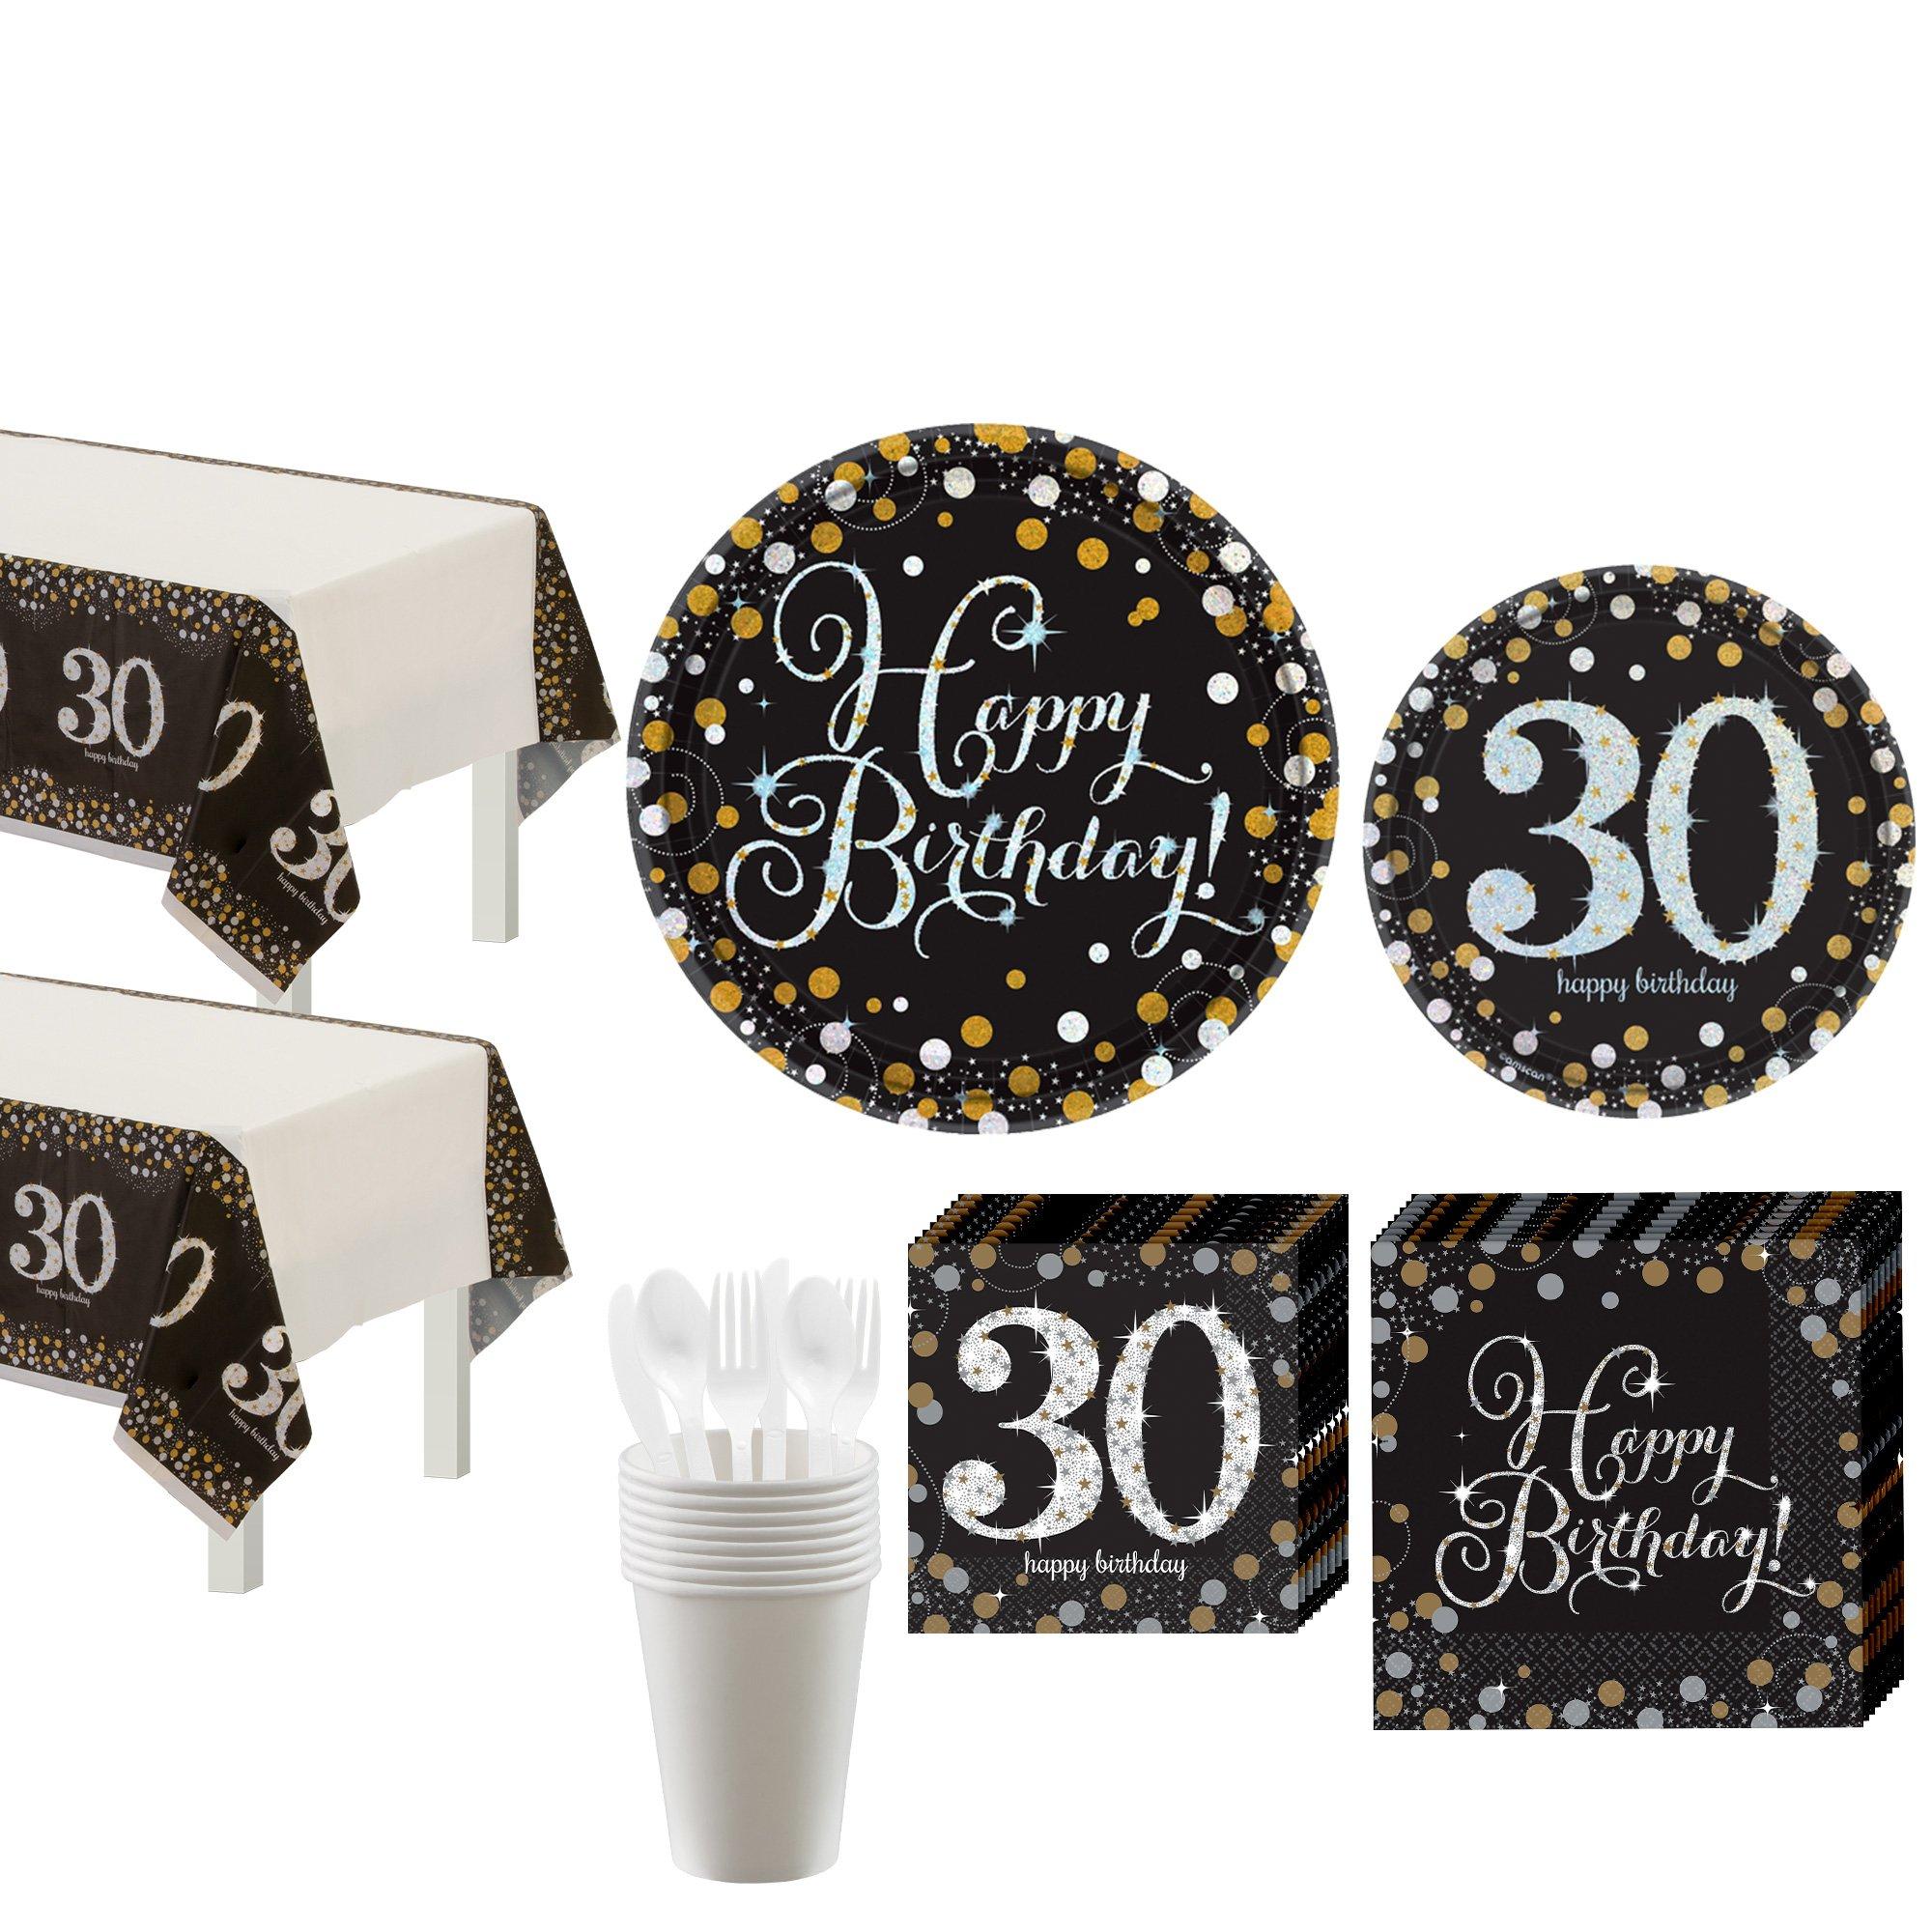 30th Birthday Decorations for Men, Black and Gold Happy Birthday  Decorations for Women Men Boys Girls 30th Birthday Party 30th Birthday  Decorations